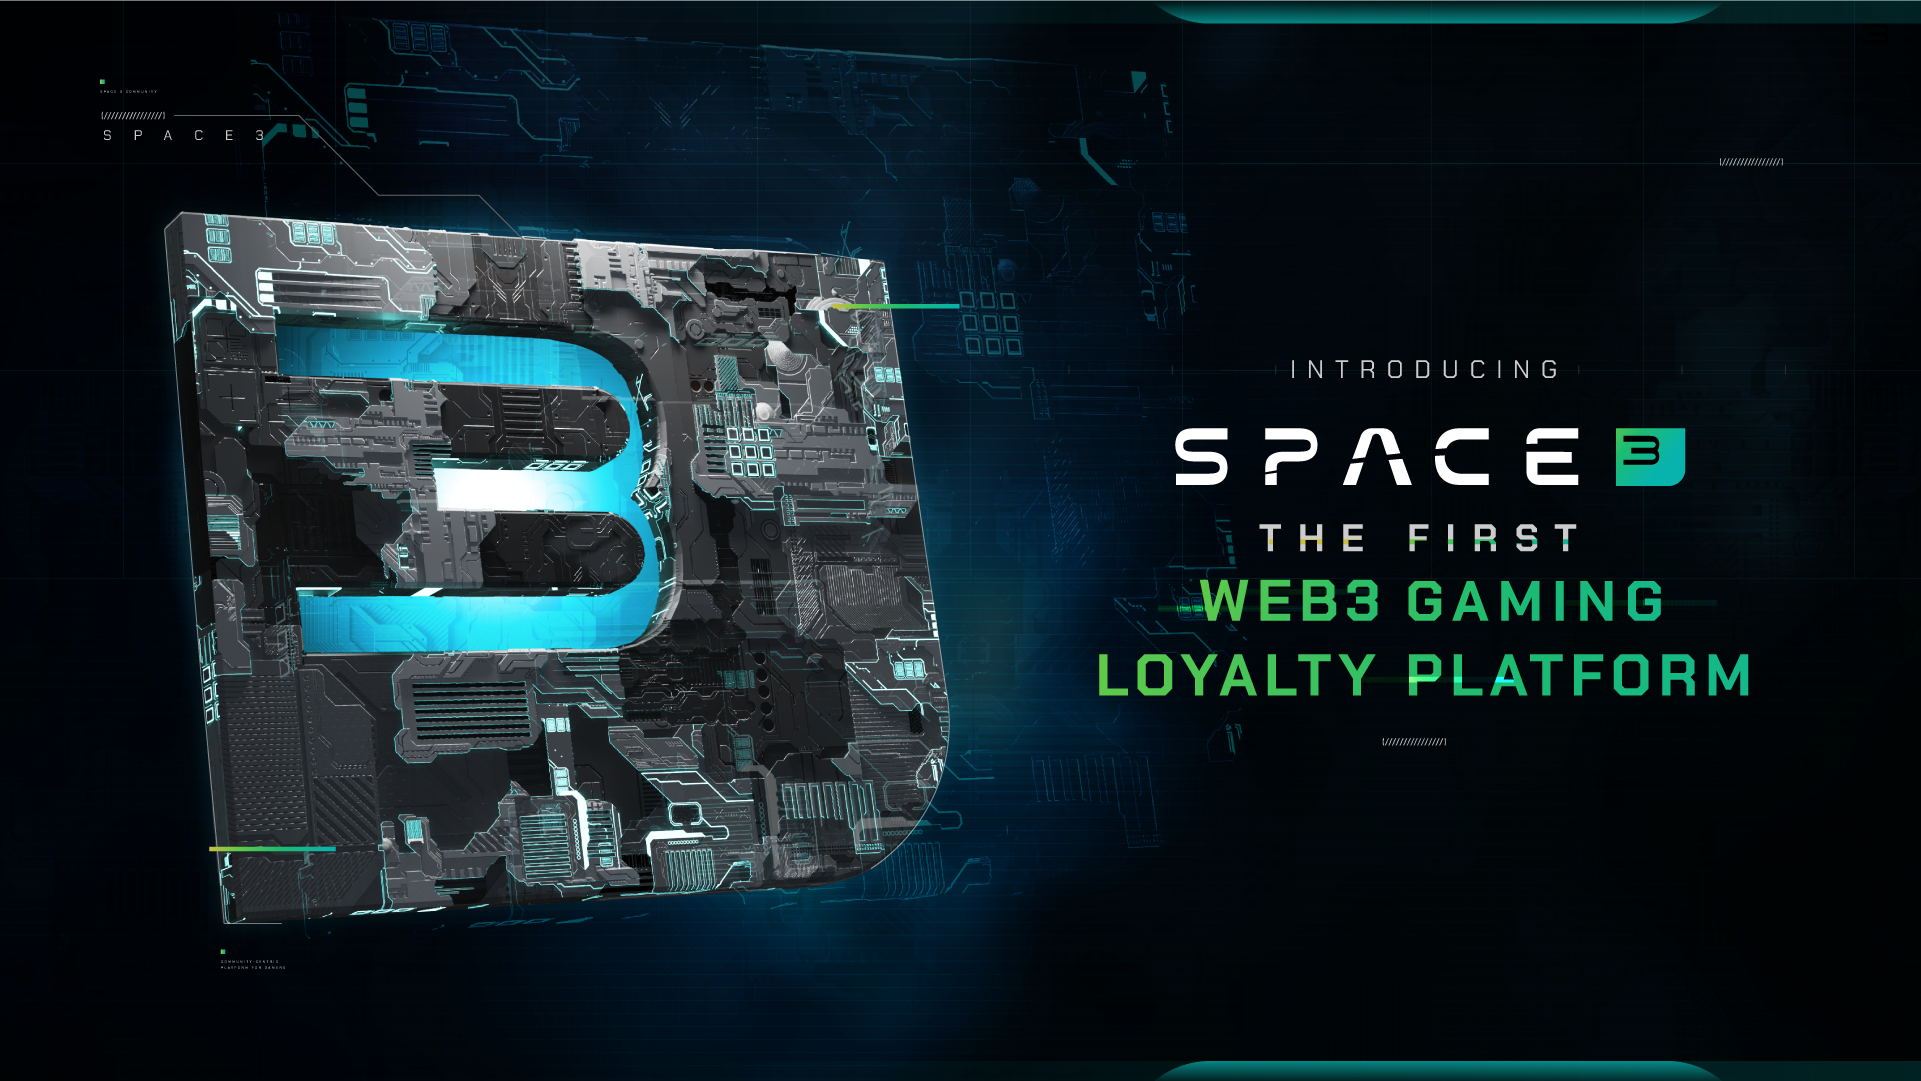 Introducing Space3: The 1st Web3 Gaming Loyalty Platform